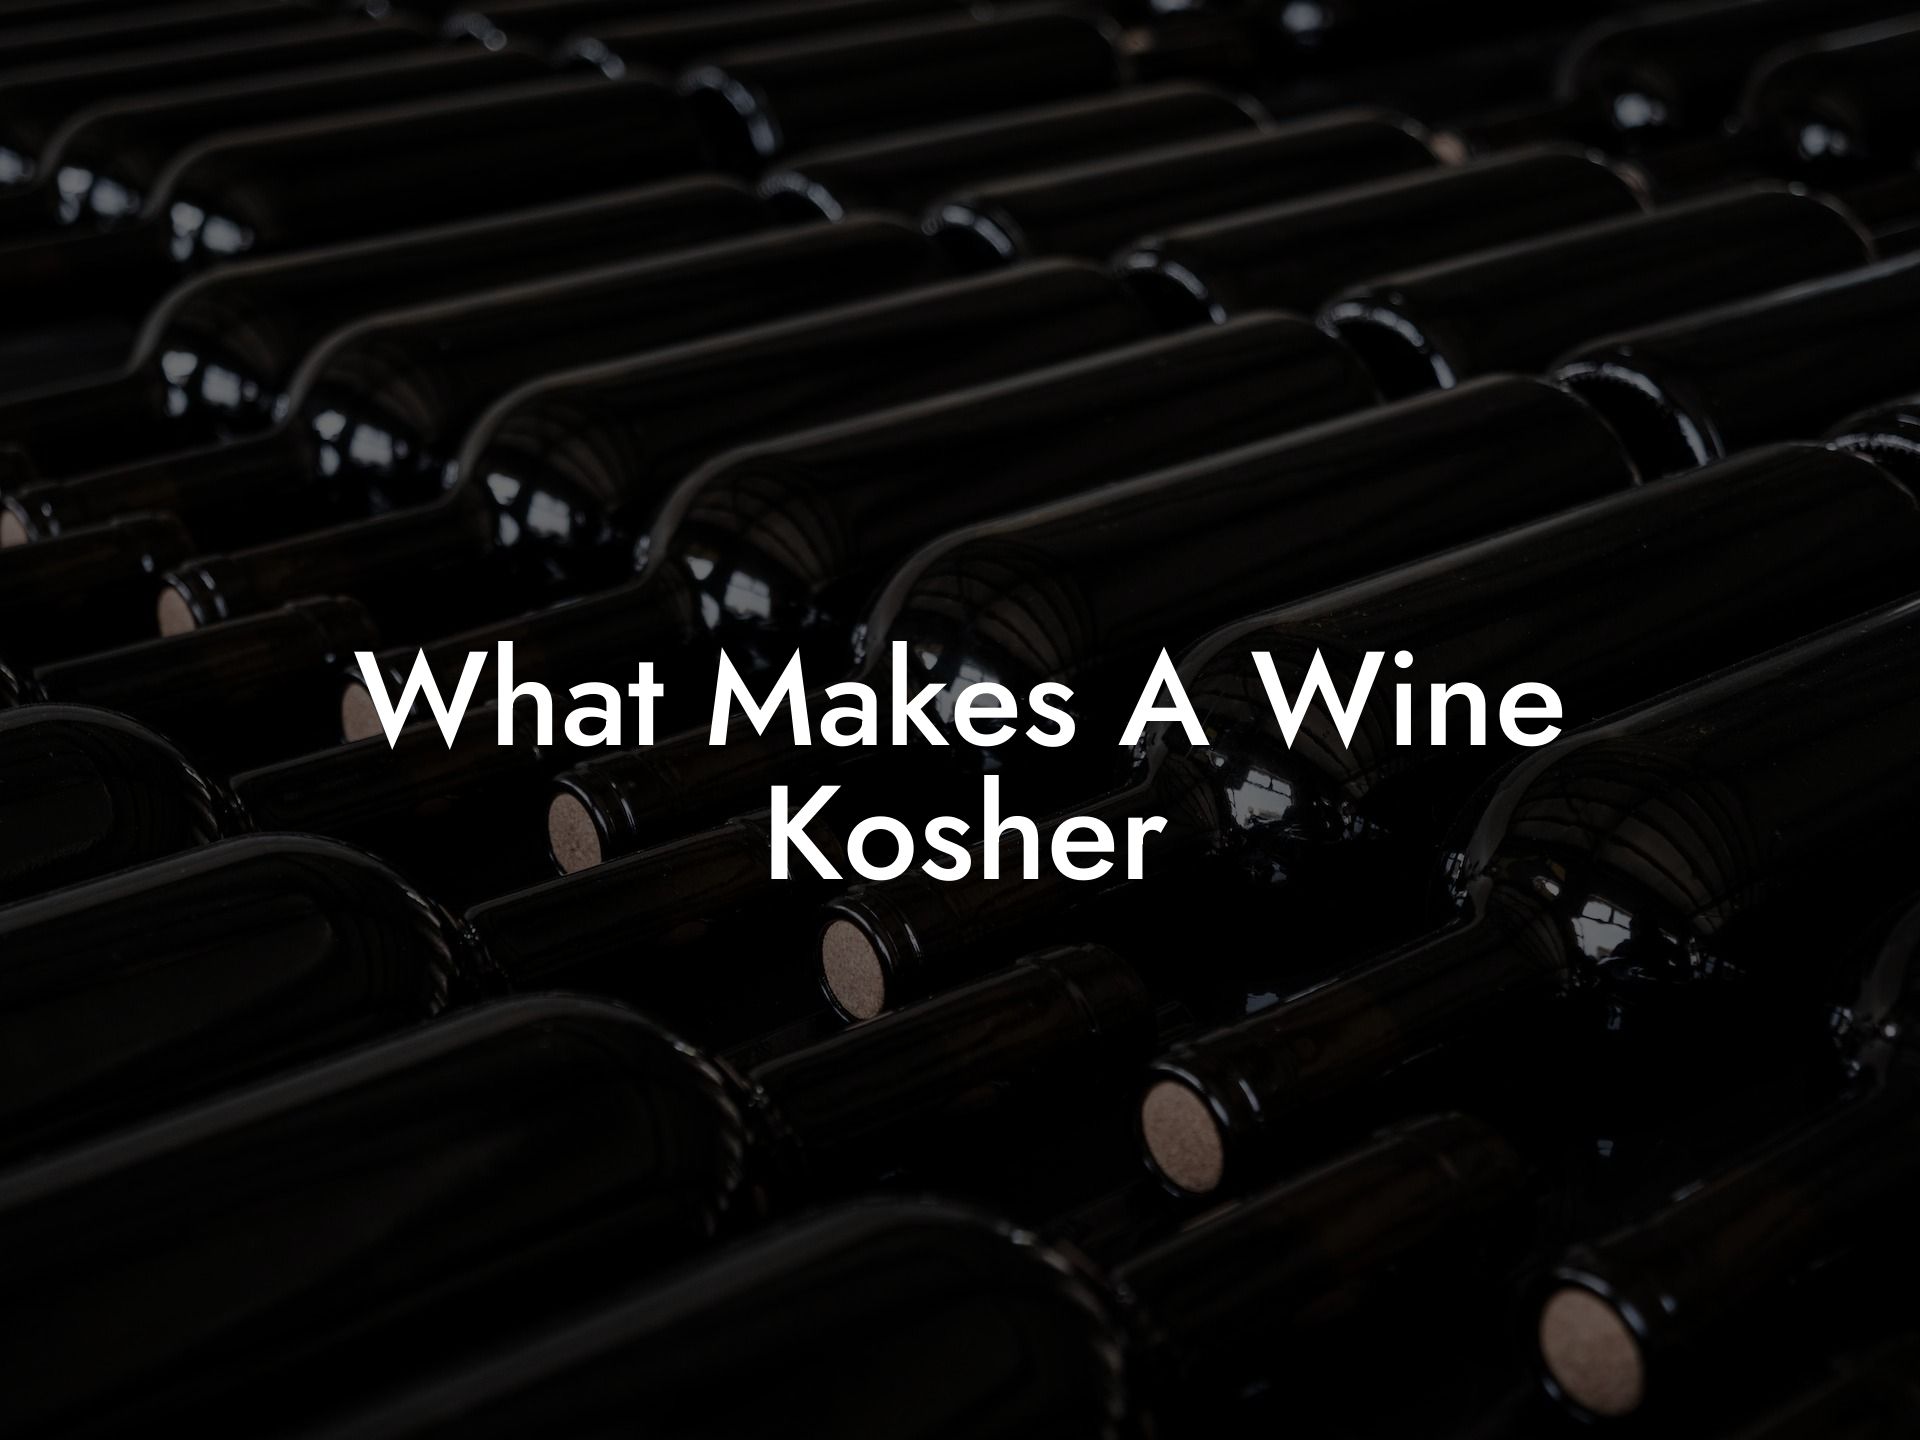 What Makes A Wine Kosher